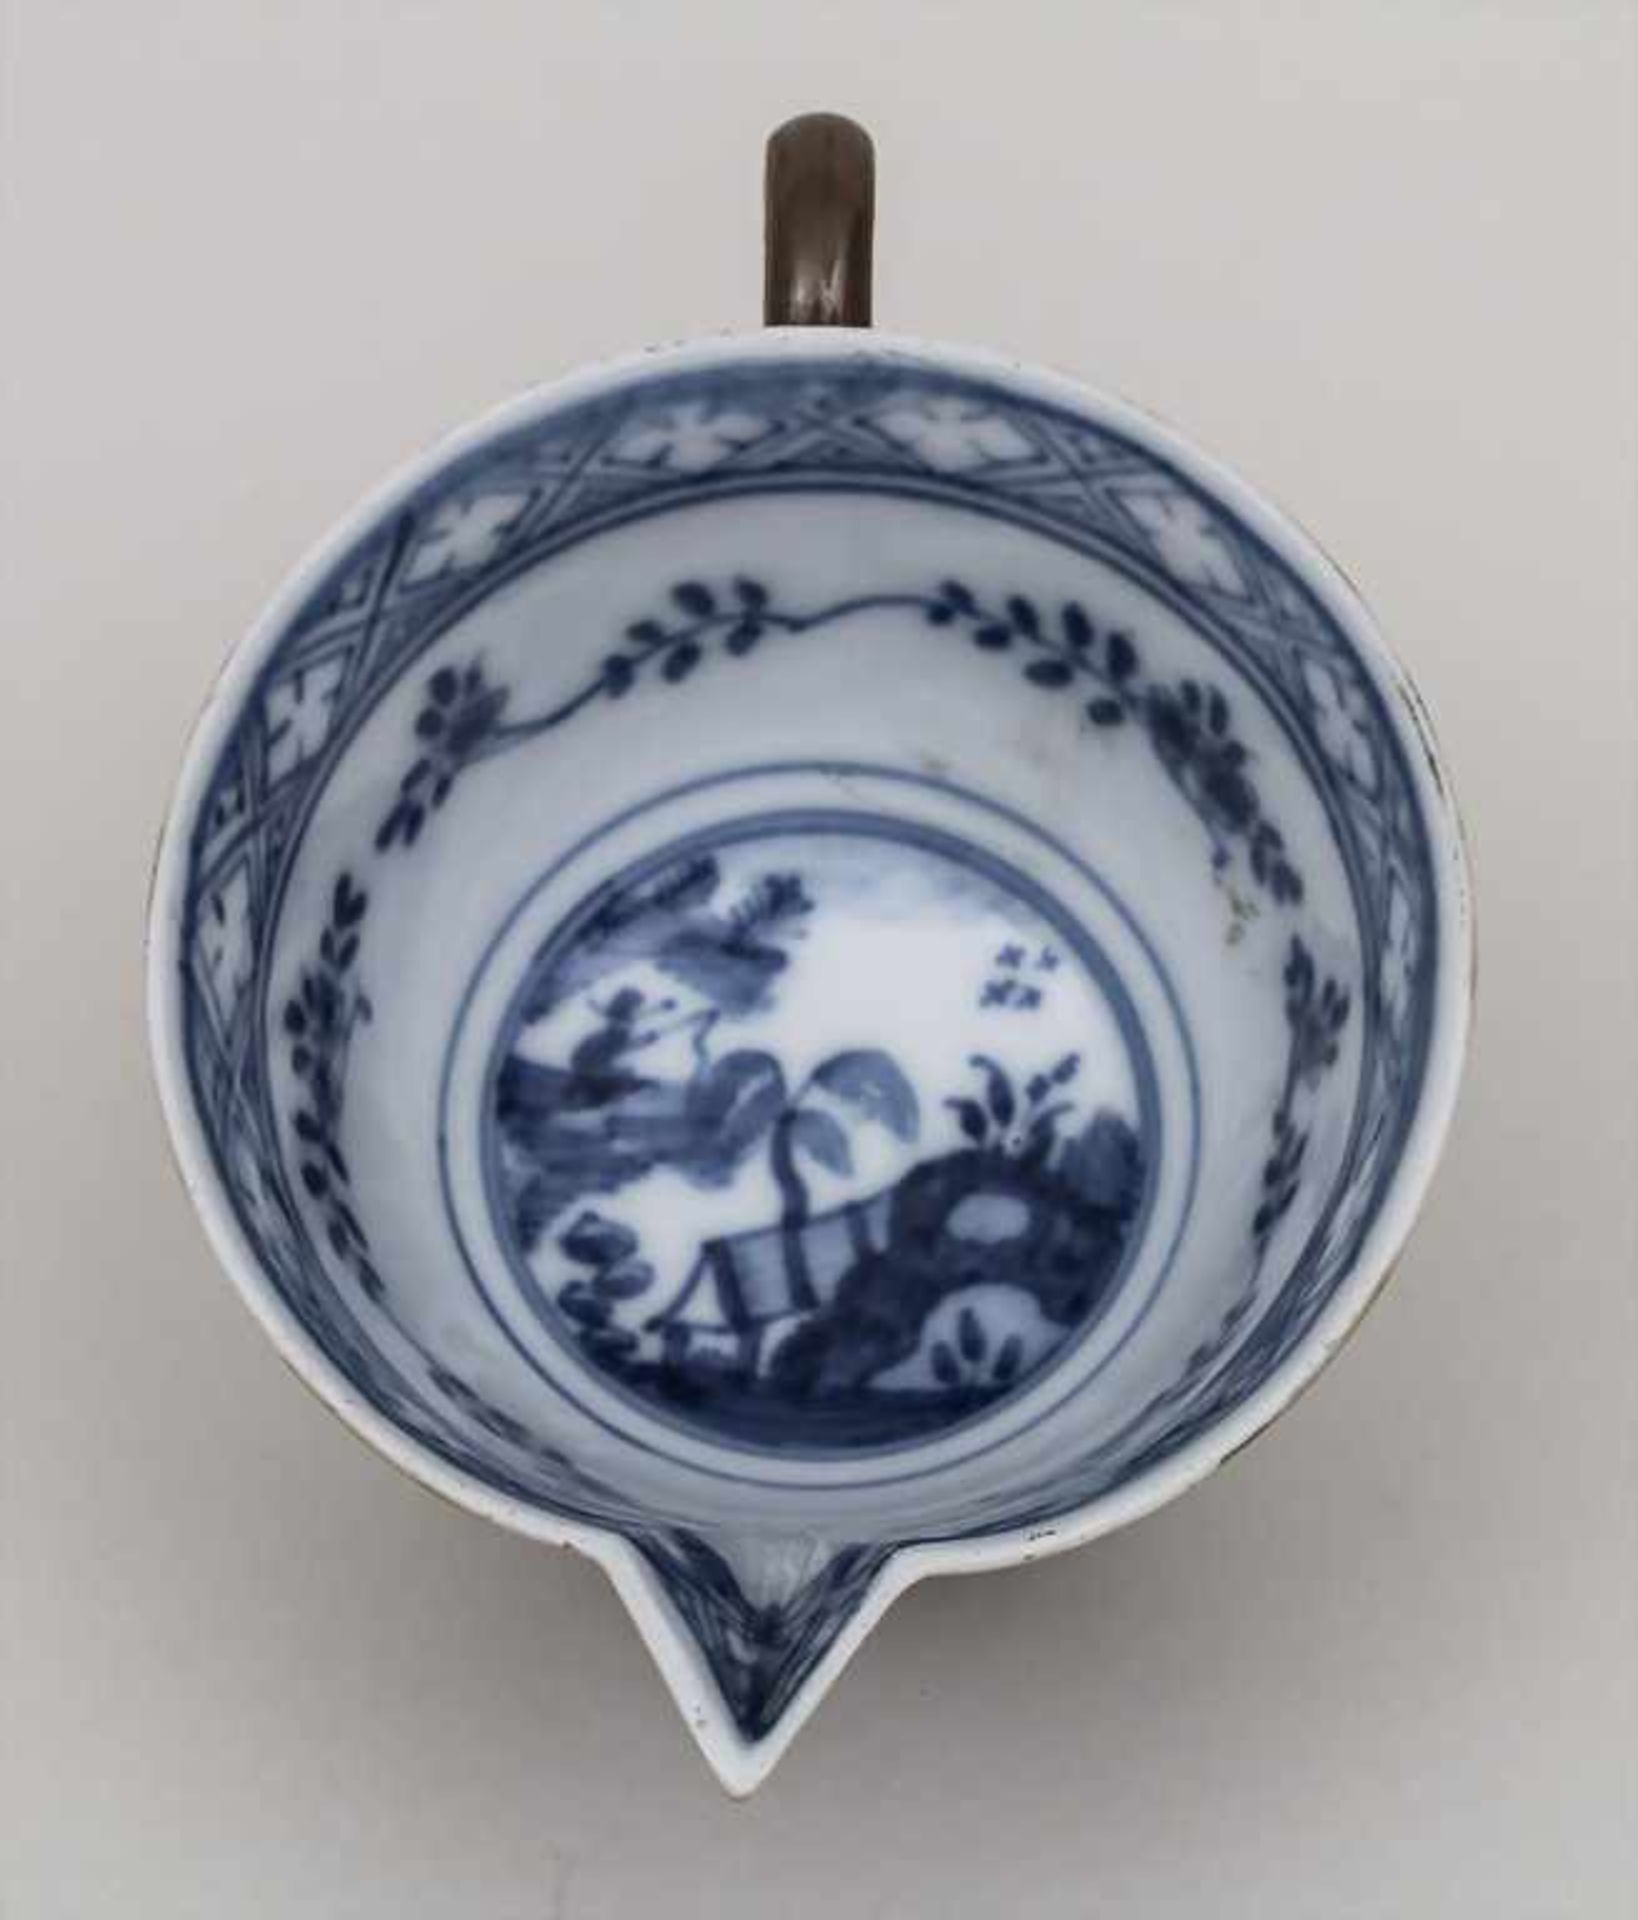 Seltene Schnabeltasse mit Chinoiserie / A rare feeding cup with Chinoiserie, Meissen, um 1740 - Image 3 of 4